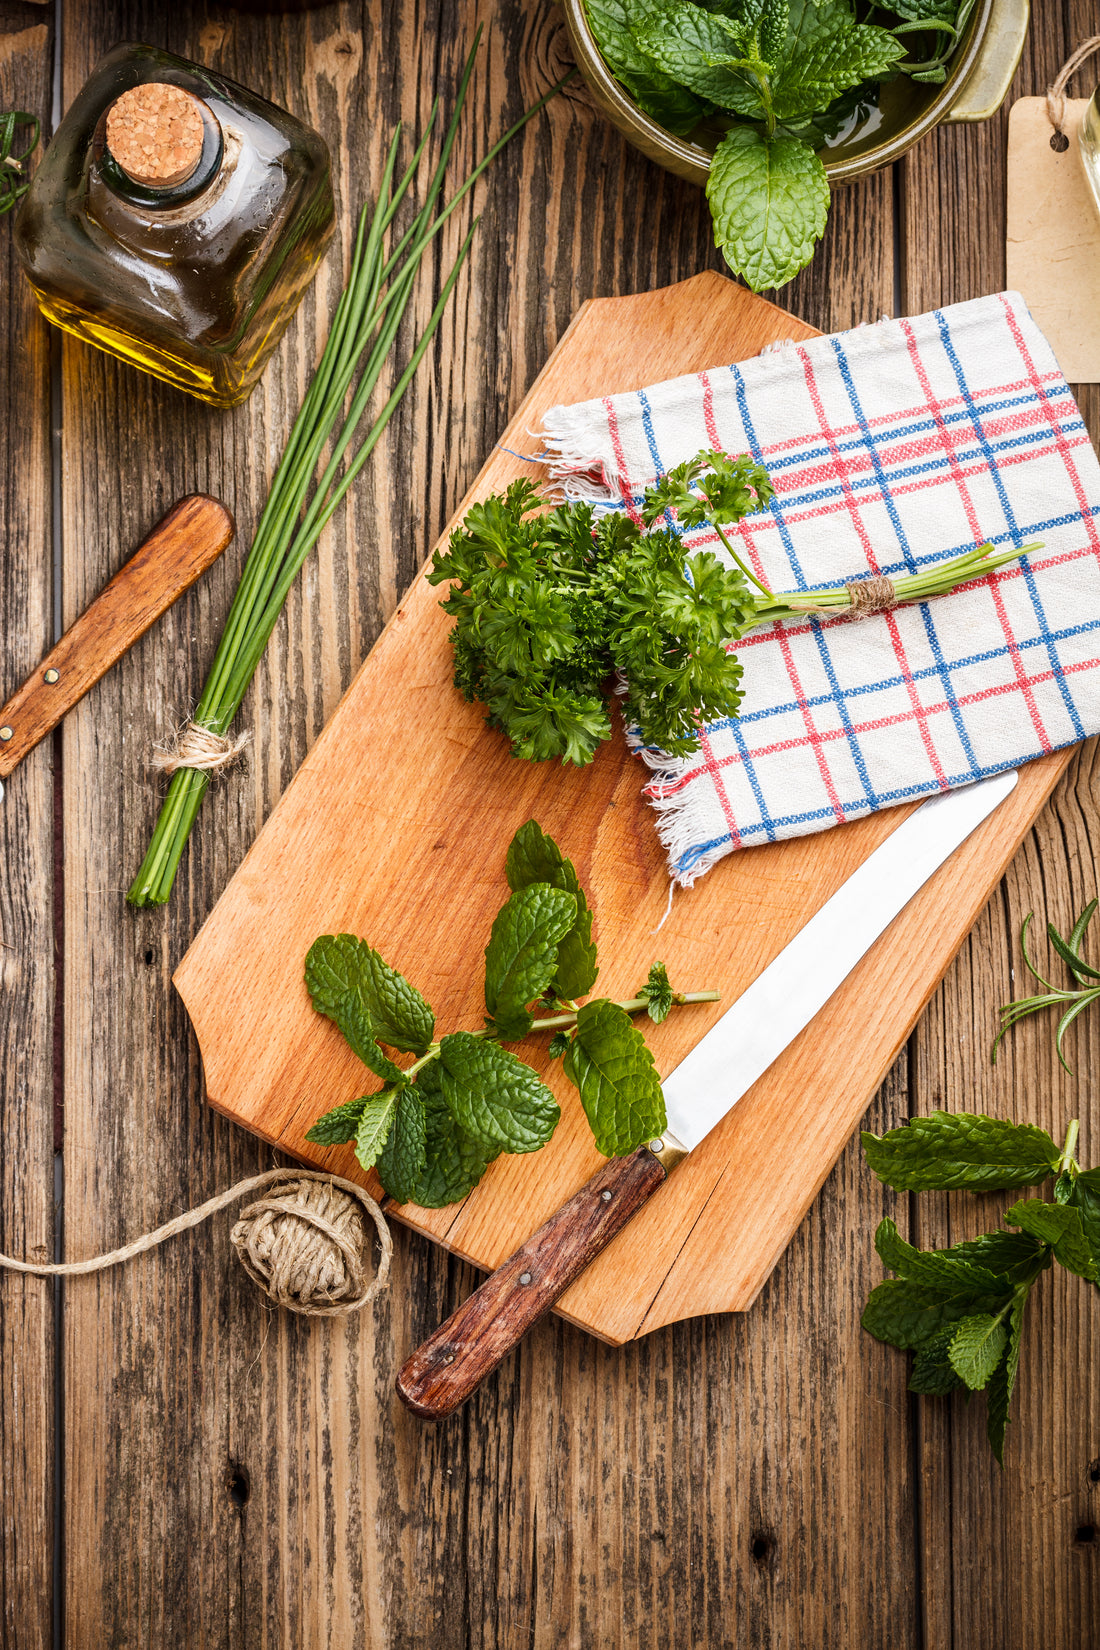 Nutritional Herbs to Use in Cooking